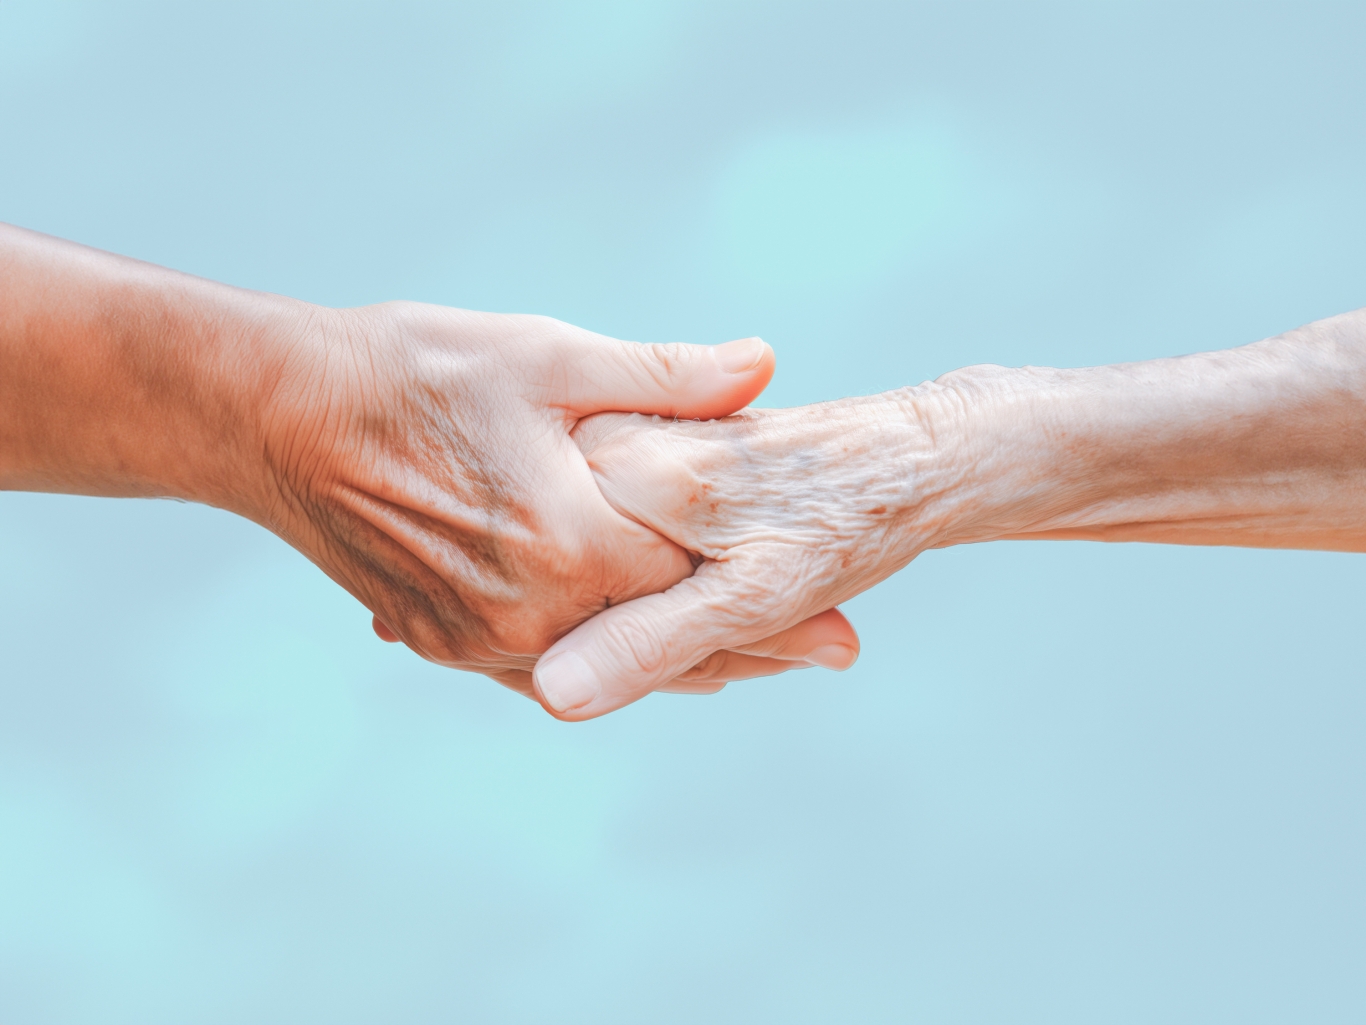 Young hand holding an older persons hand in a caring way.